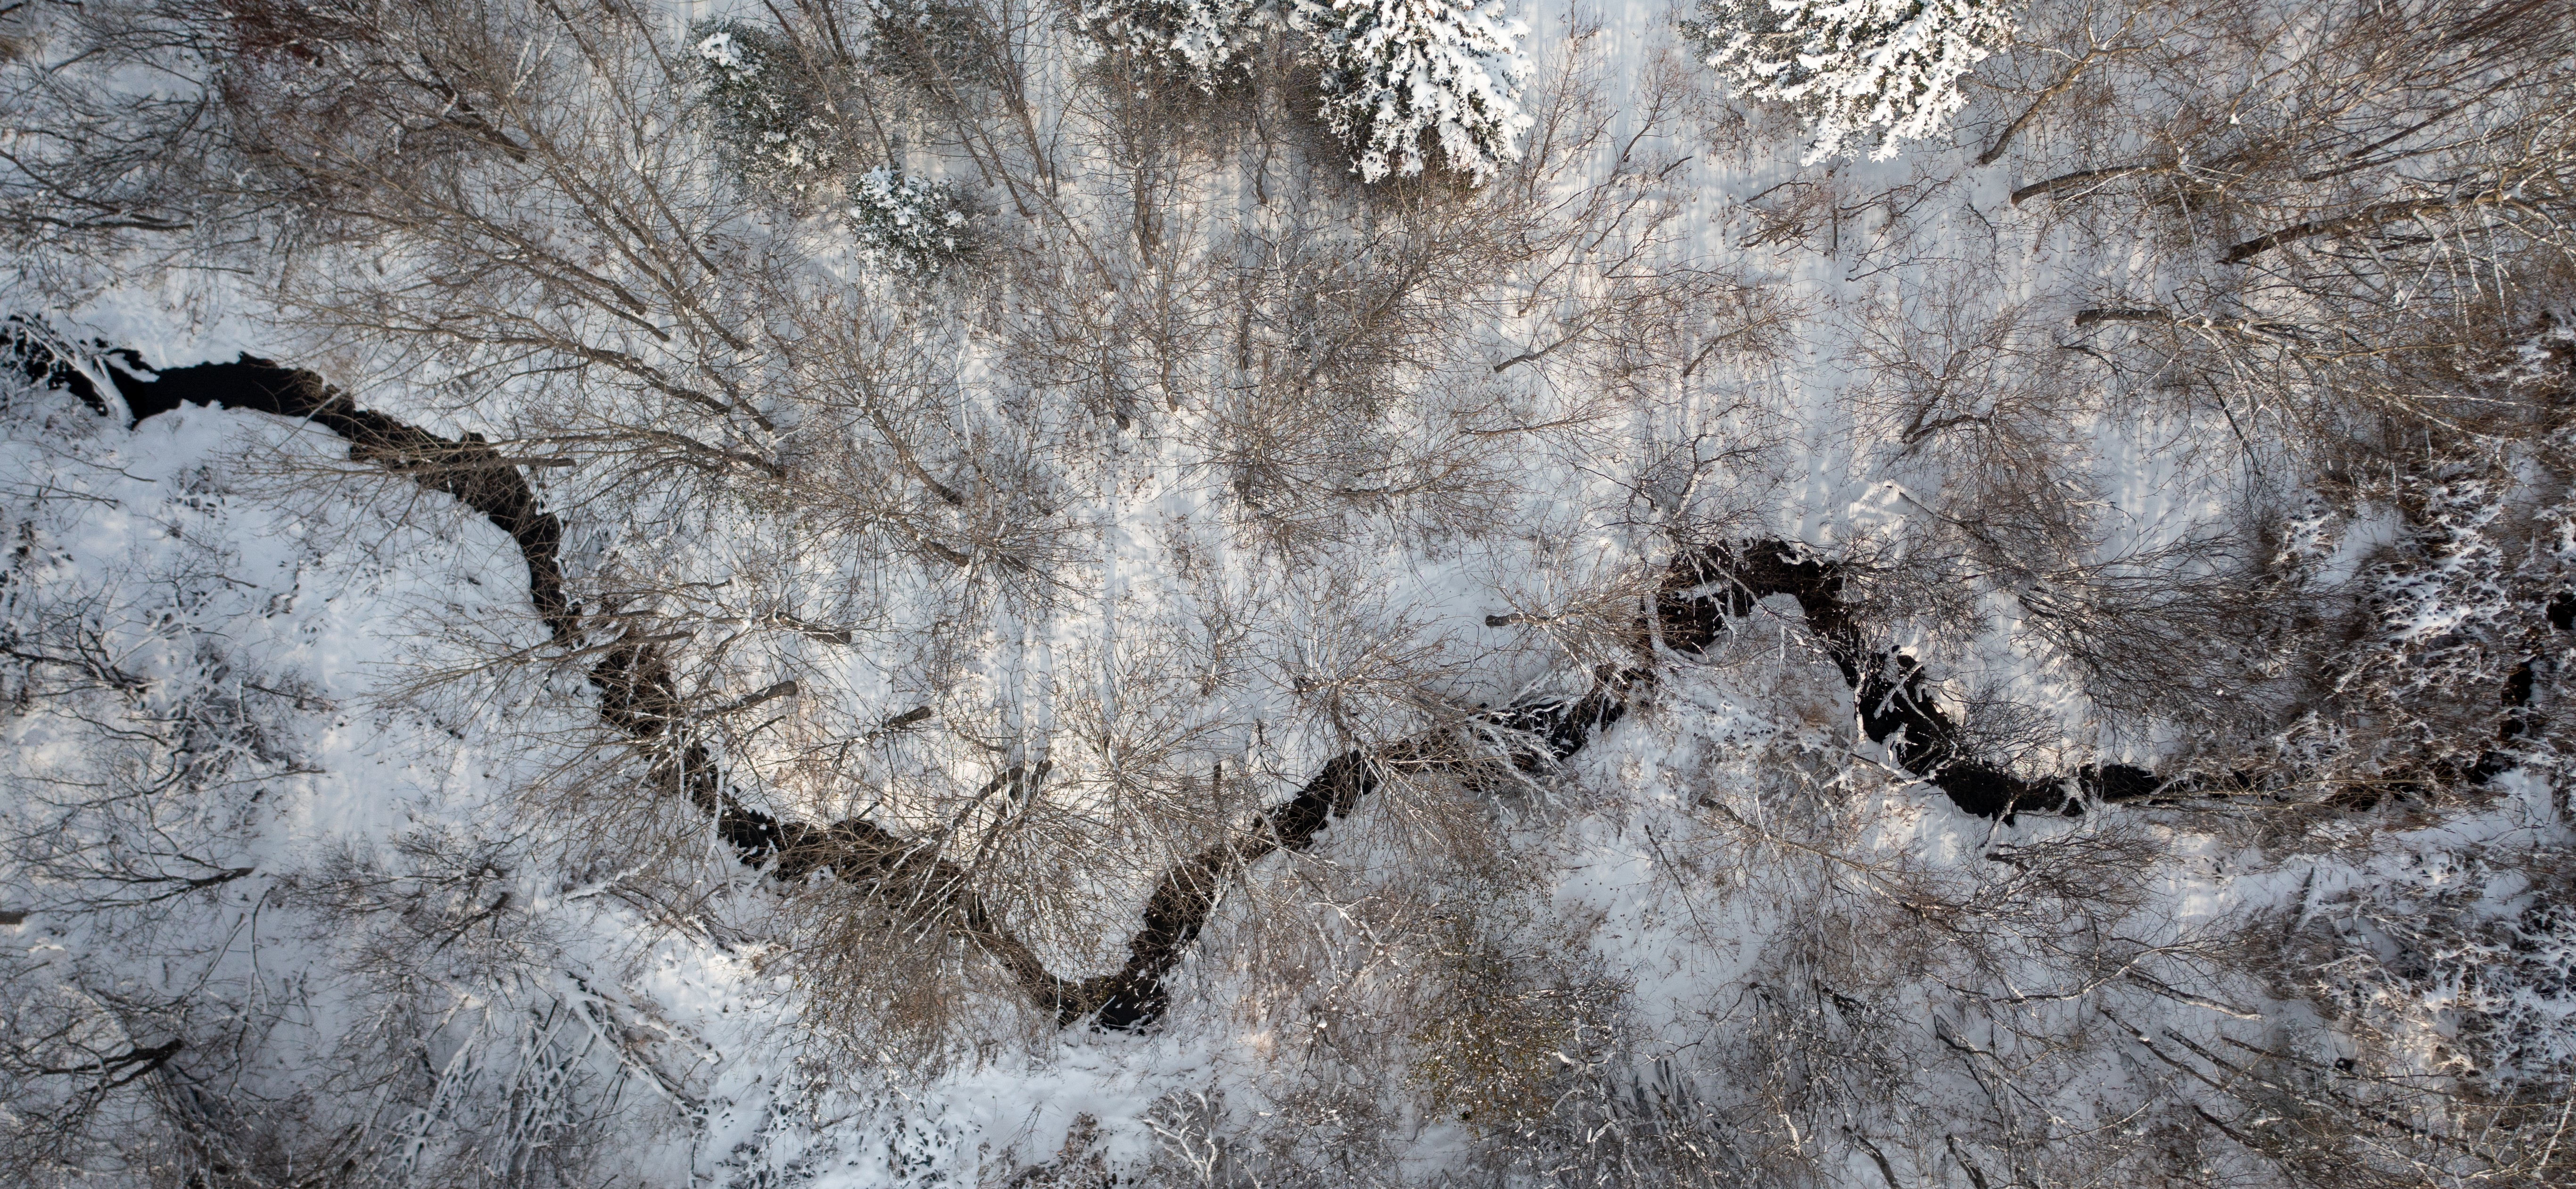 A photo of freshly-fallen snow with a stream and trees taken from directly above